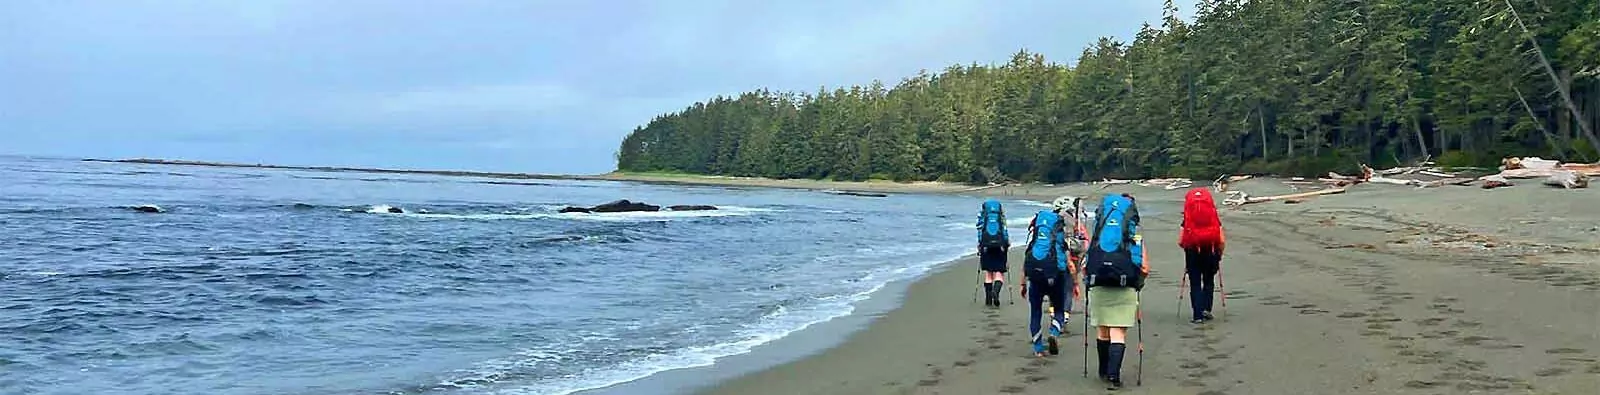 vancouver island wilderness tours